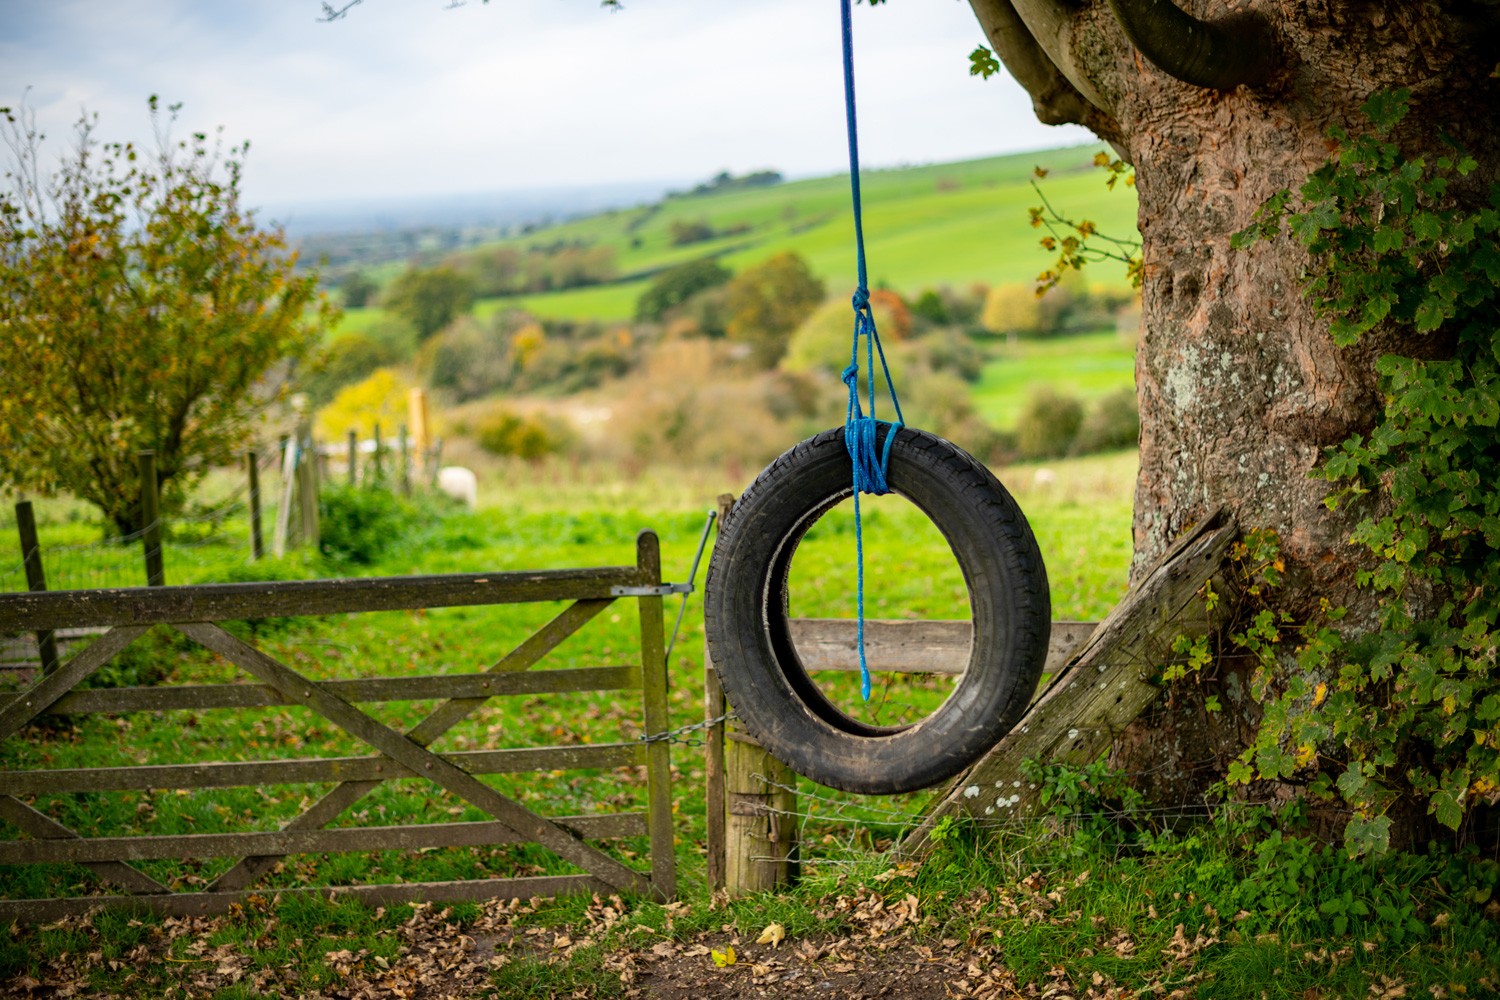 Tire and rope hanging from an old oak tree. Brill Hill, Buckinghamshire countryside. Heritage site and popular tourist attraction location.